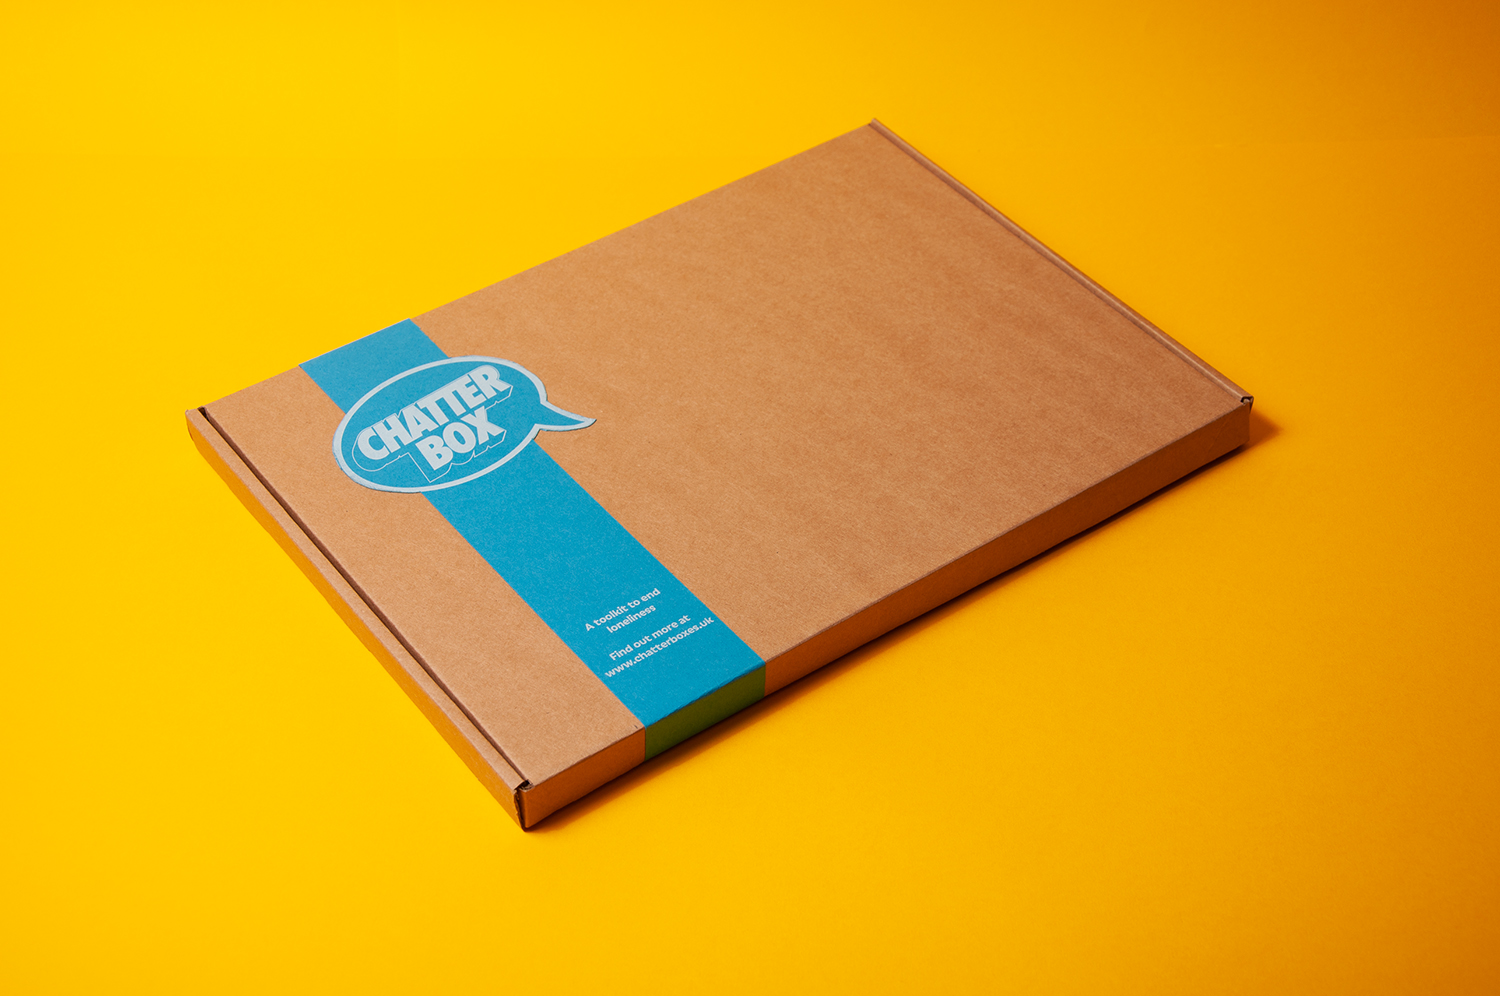 A photograph of a brown cardboard box with a blue band around one end. The band has a speech bubble shaped logo reading Chatterbox. The box is sitting on a yellow background.